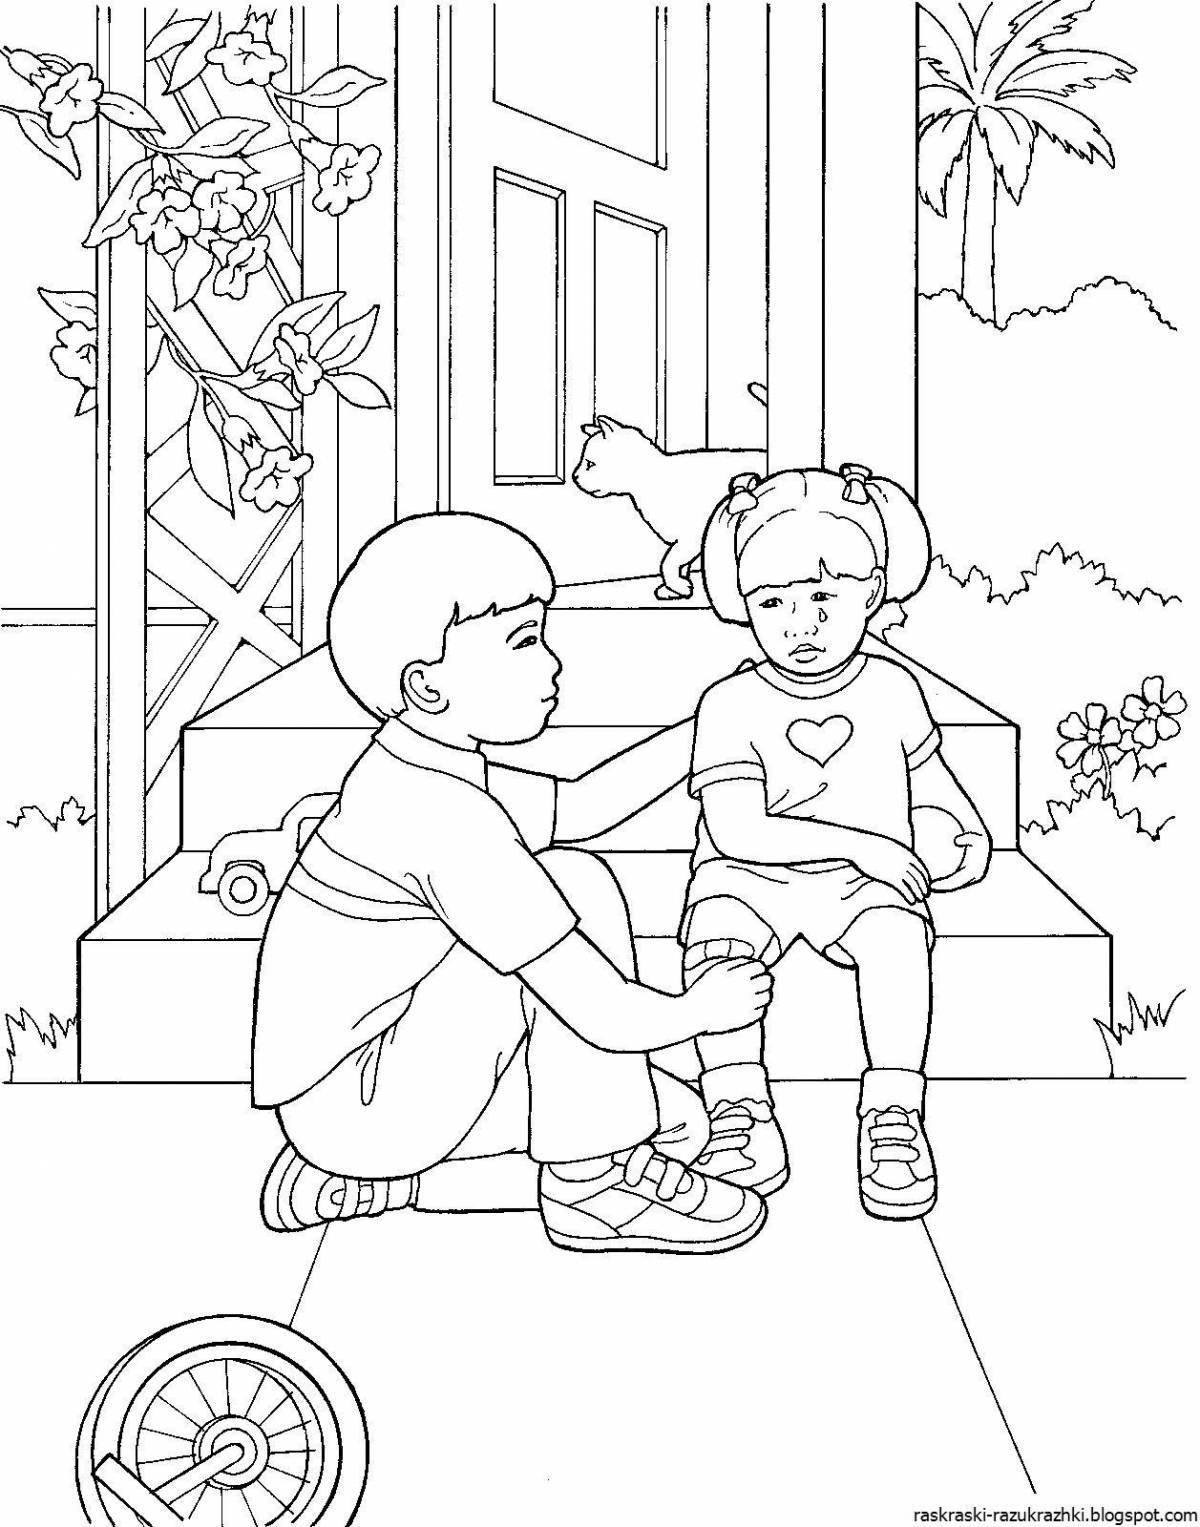 Generous mercy coloring page